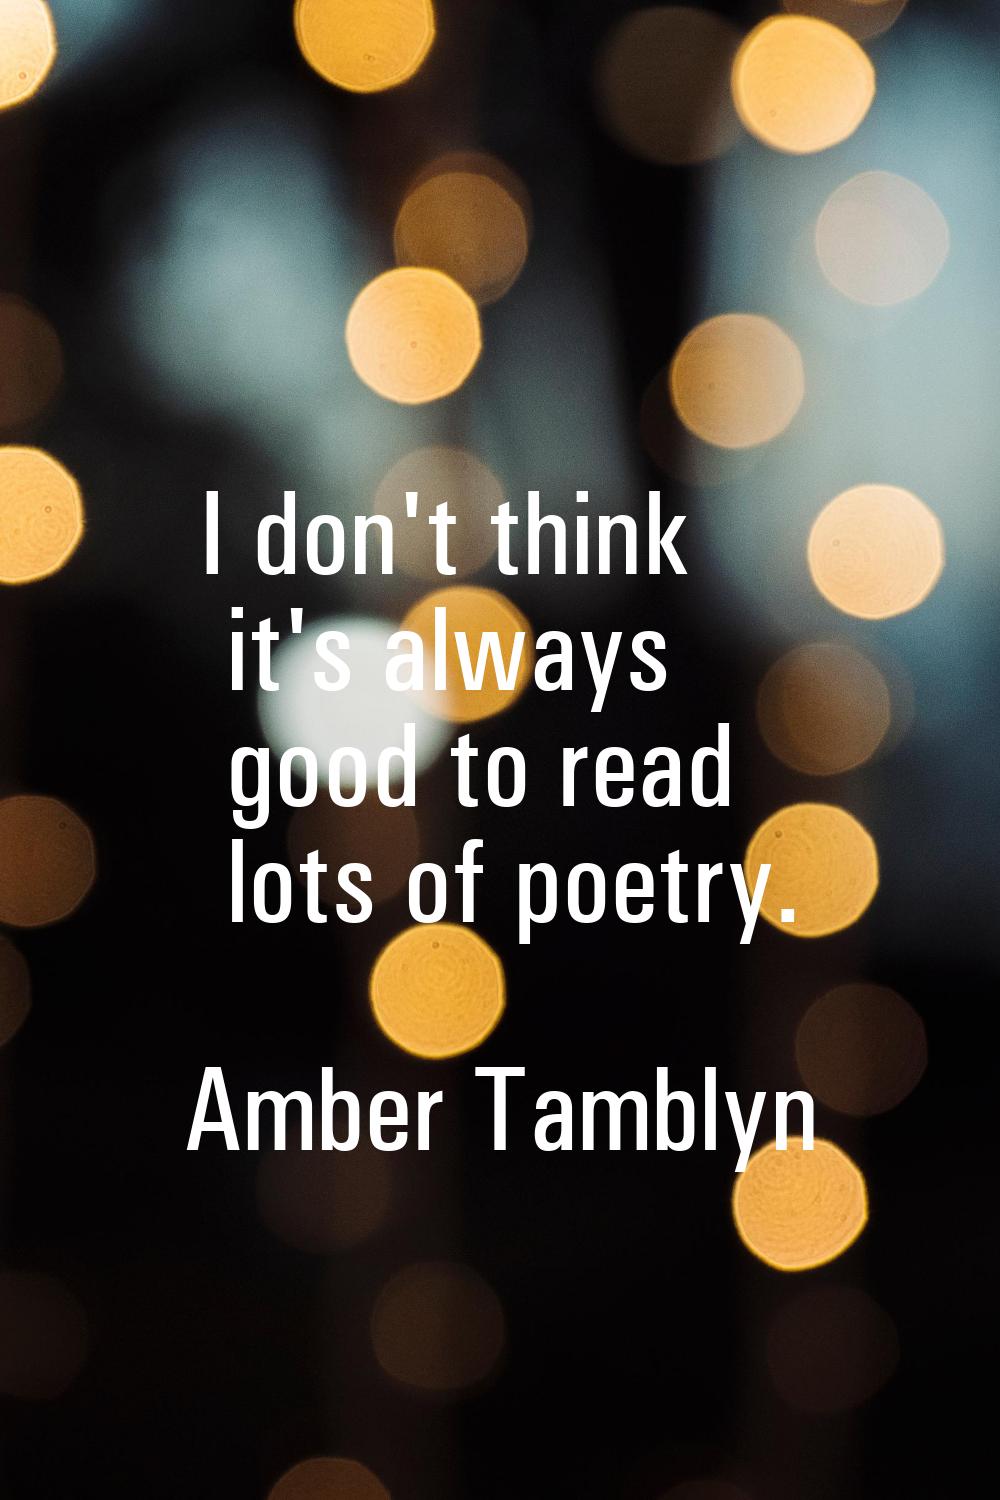 I don't think it's always good to read lots of poetry.